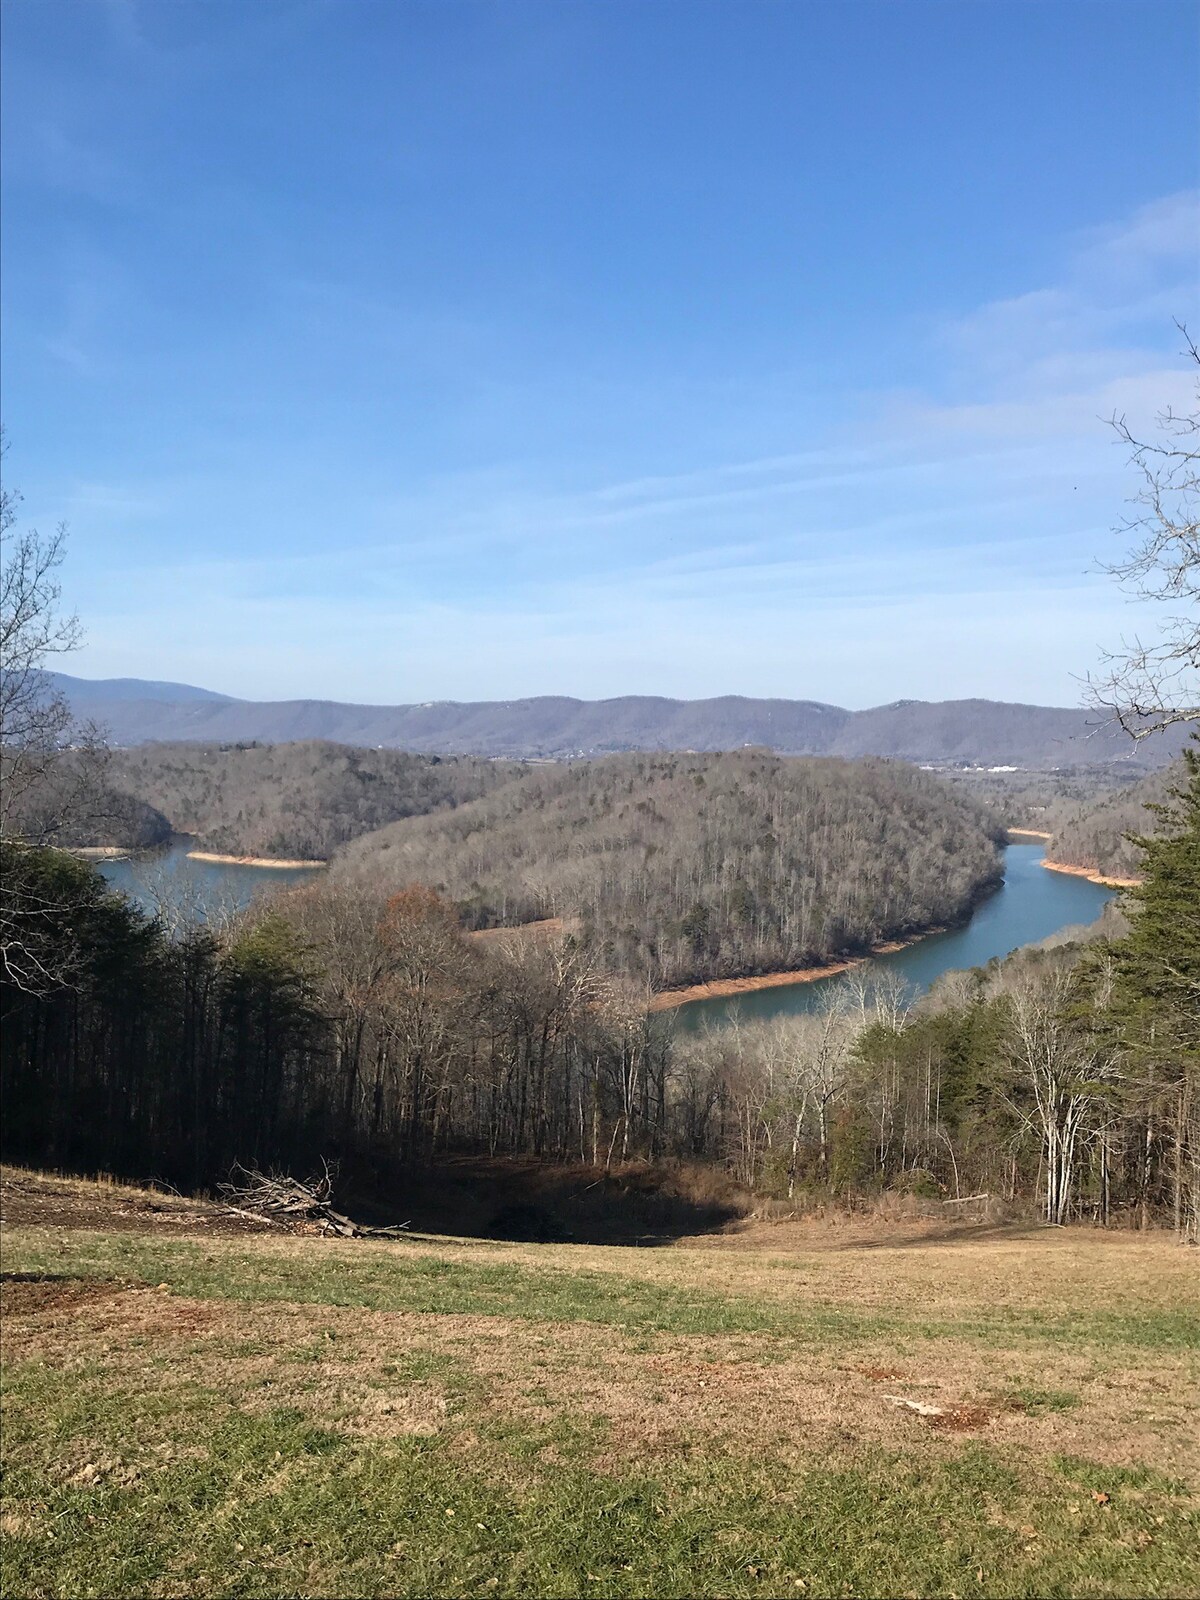 Norris Lake Home on 140 acre ranch lakeview/access